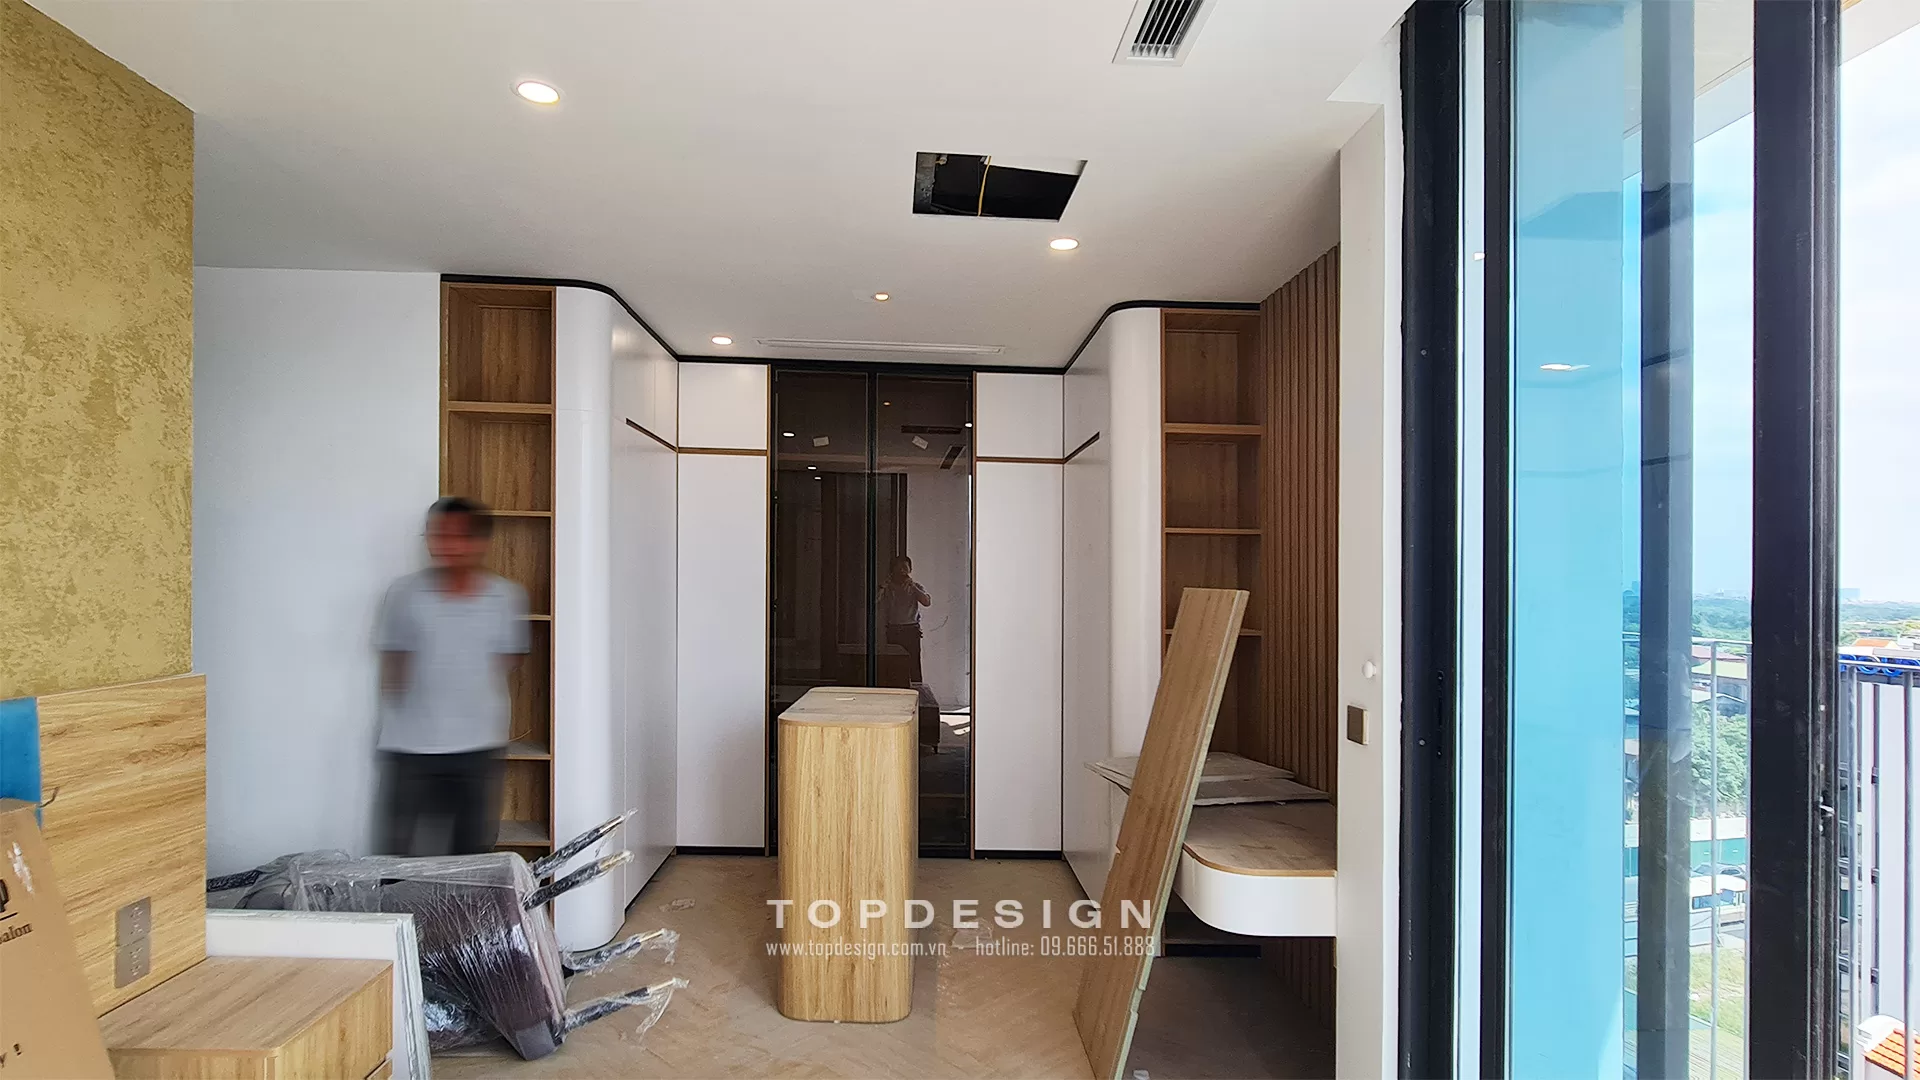 Thi công nội thất Penthouse Tây Hồ Residence-Topdesign 09